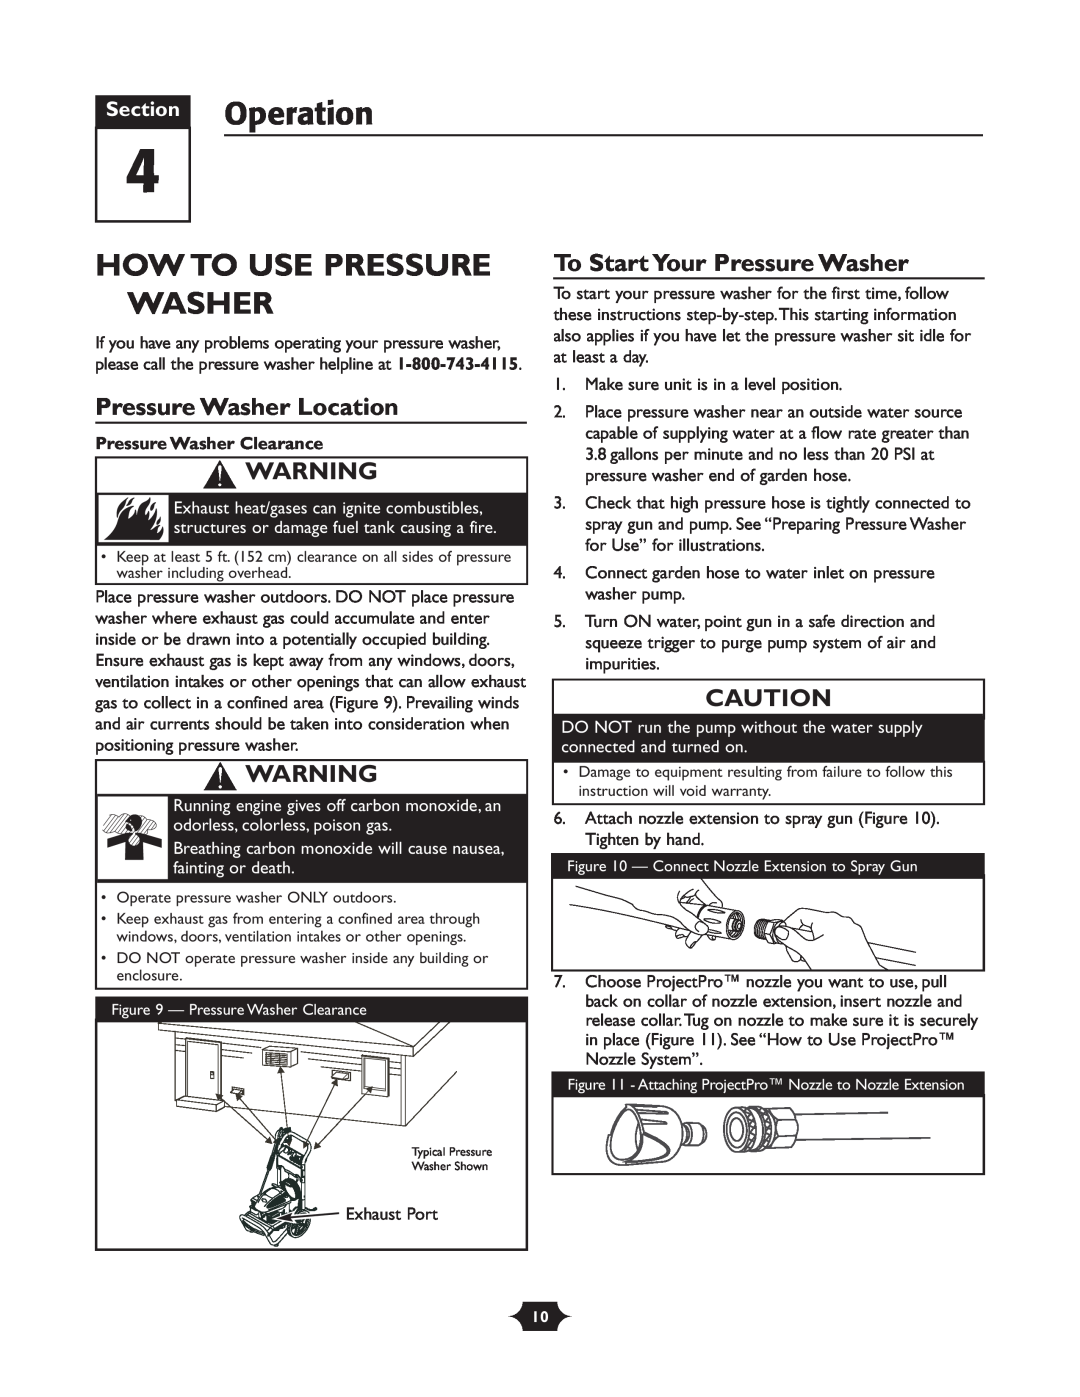 Briggs & Stratton 20263 Section Operation, How To Use Pressure Washer, Pressure Washer Location, Pressure Washer Clearance 